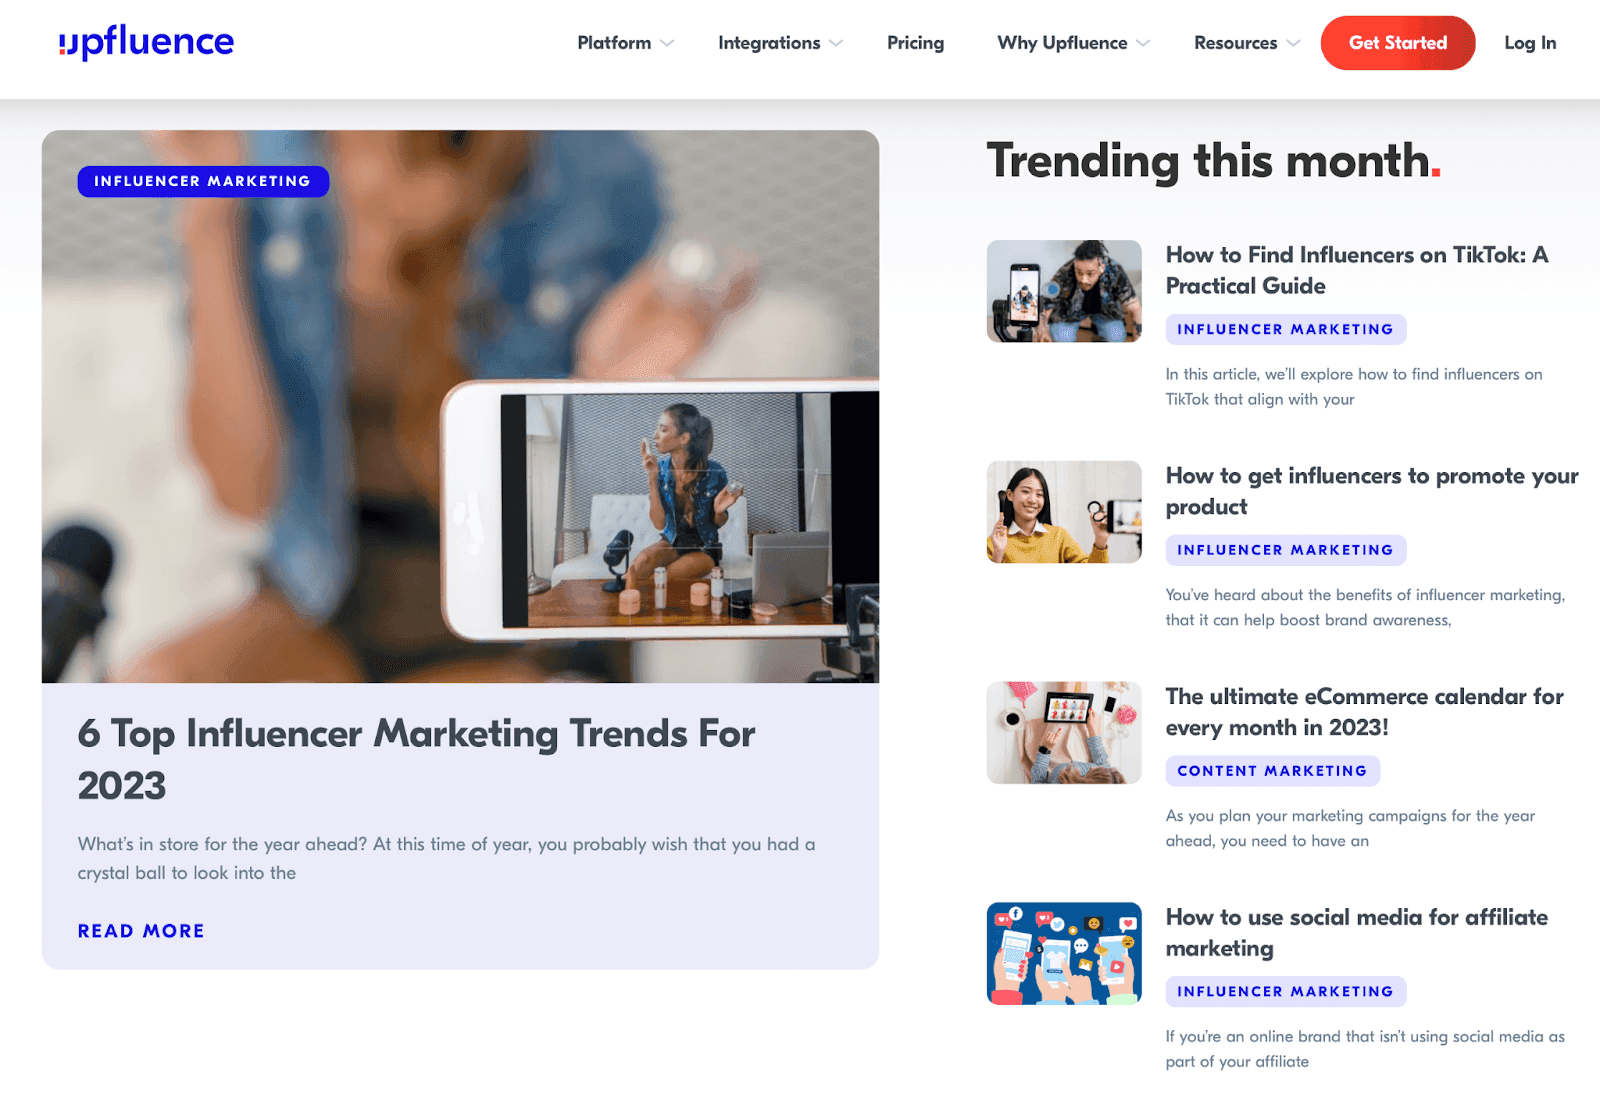 Upfluence blog page - 6 top influencer marketing trends for 2023